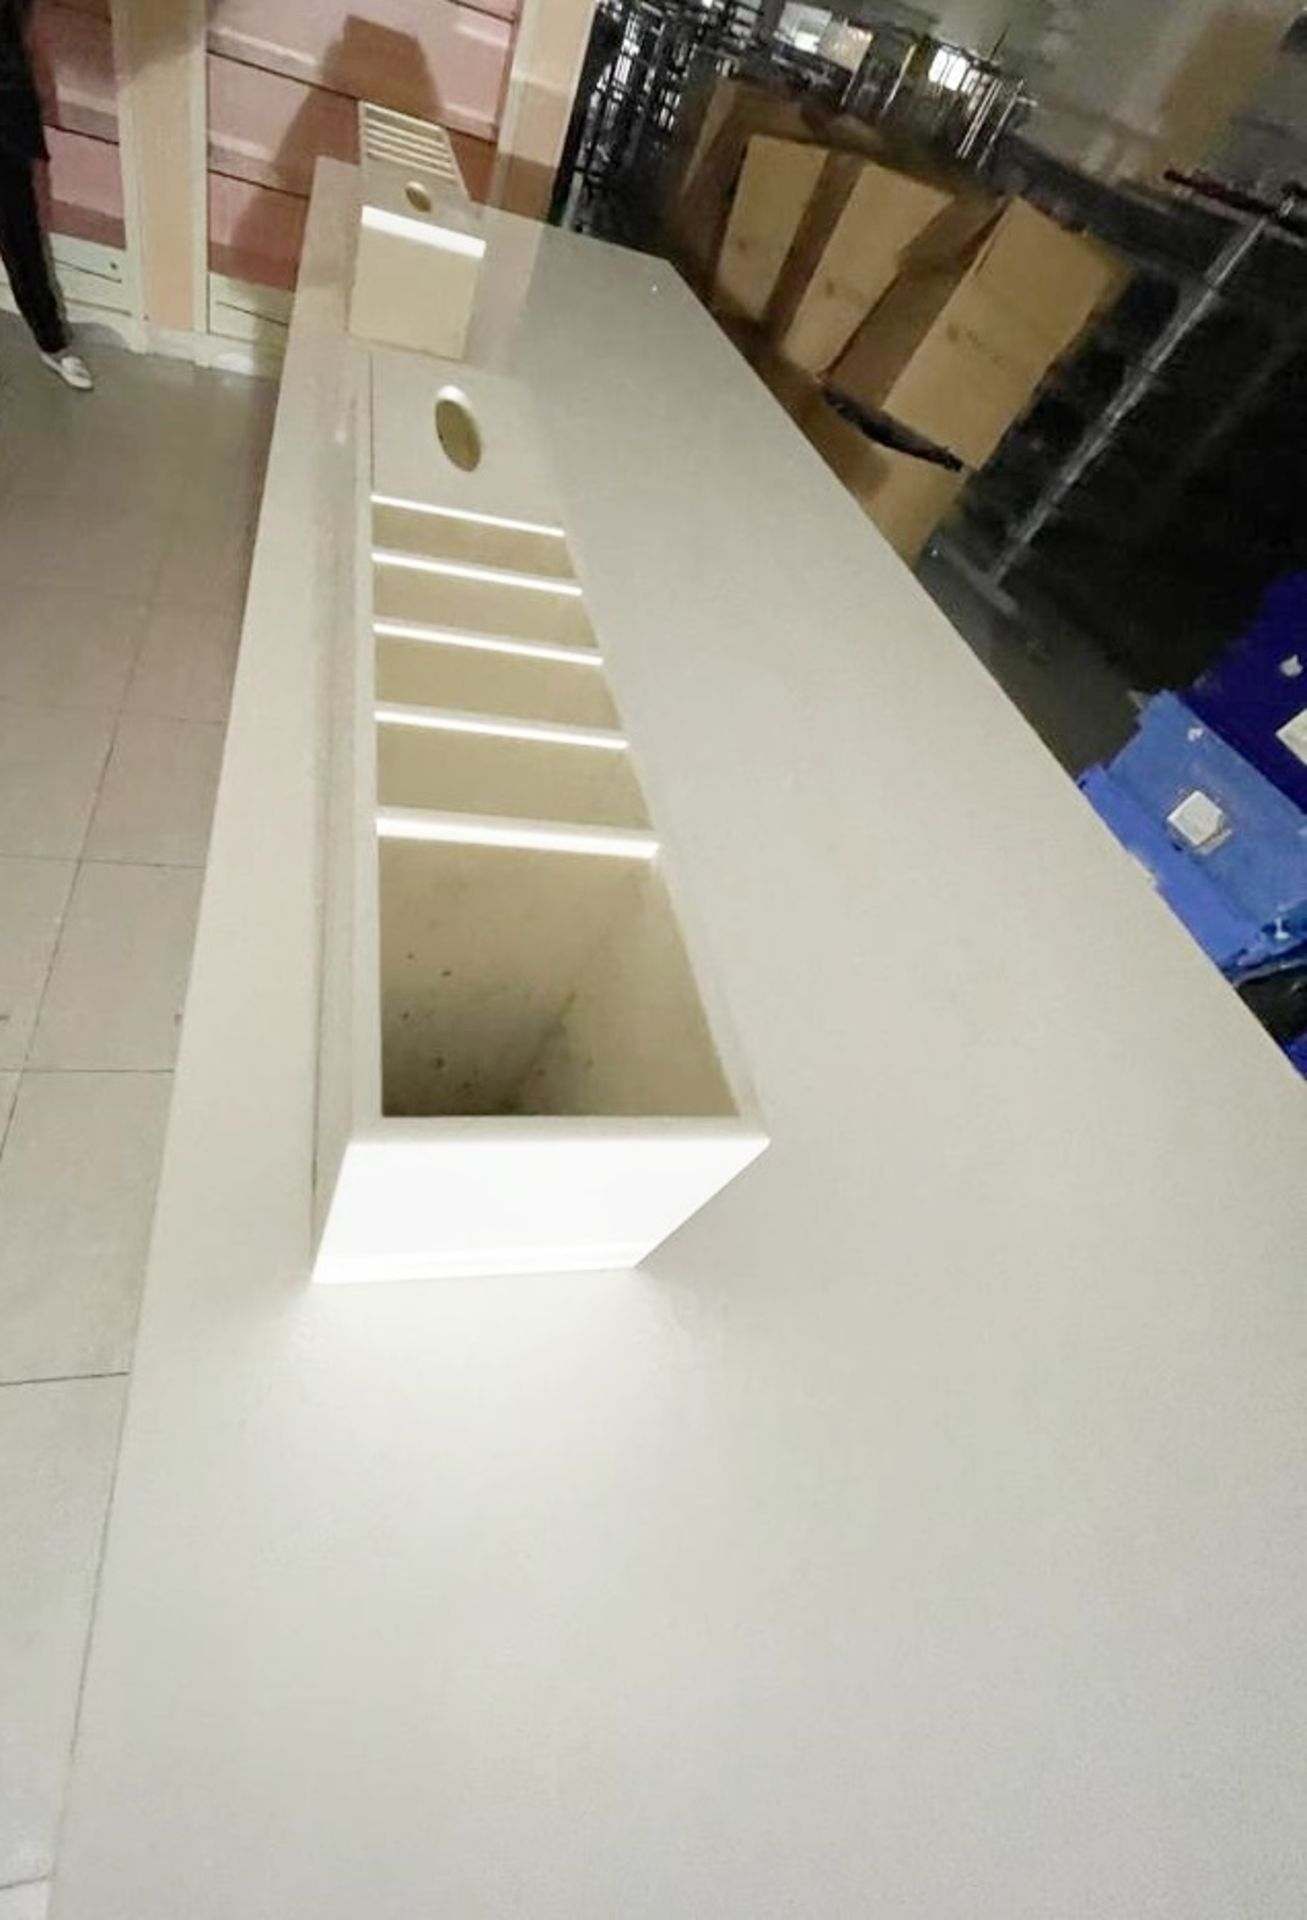 1 x Benefit Retail Testing Counter With Corian Worktop, Sample Holders and Bin Chute - Features Lots - Image 11 of 19